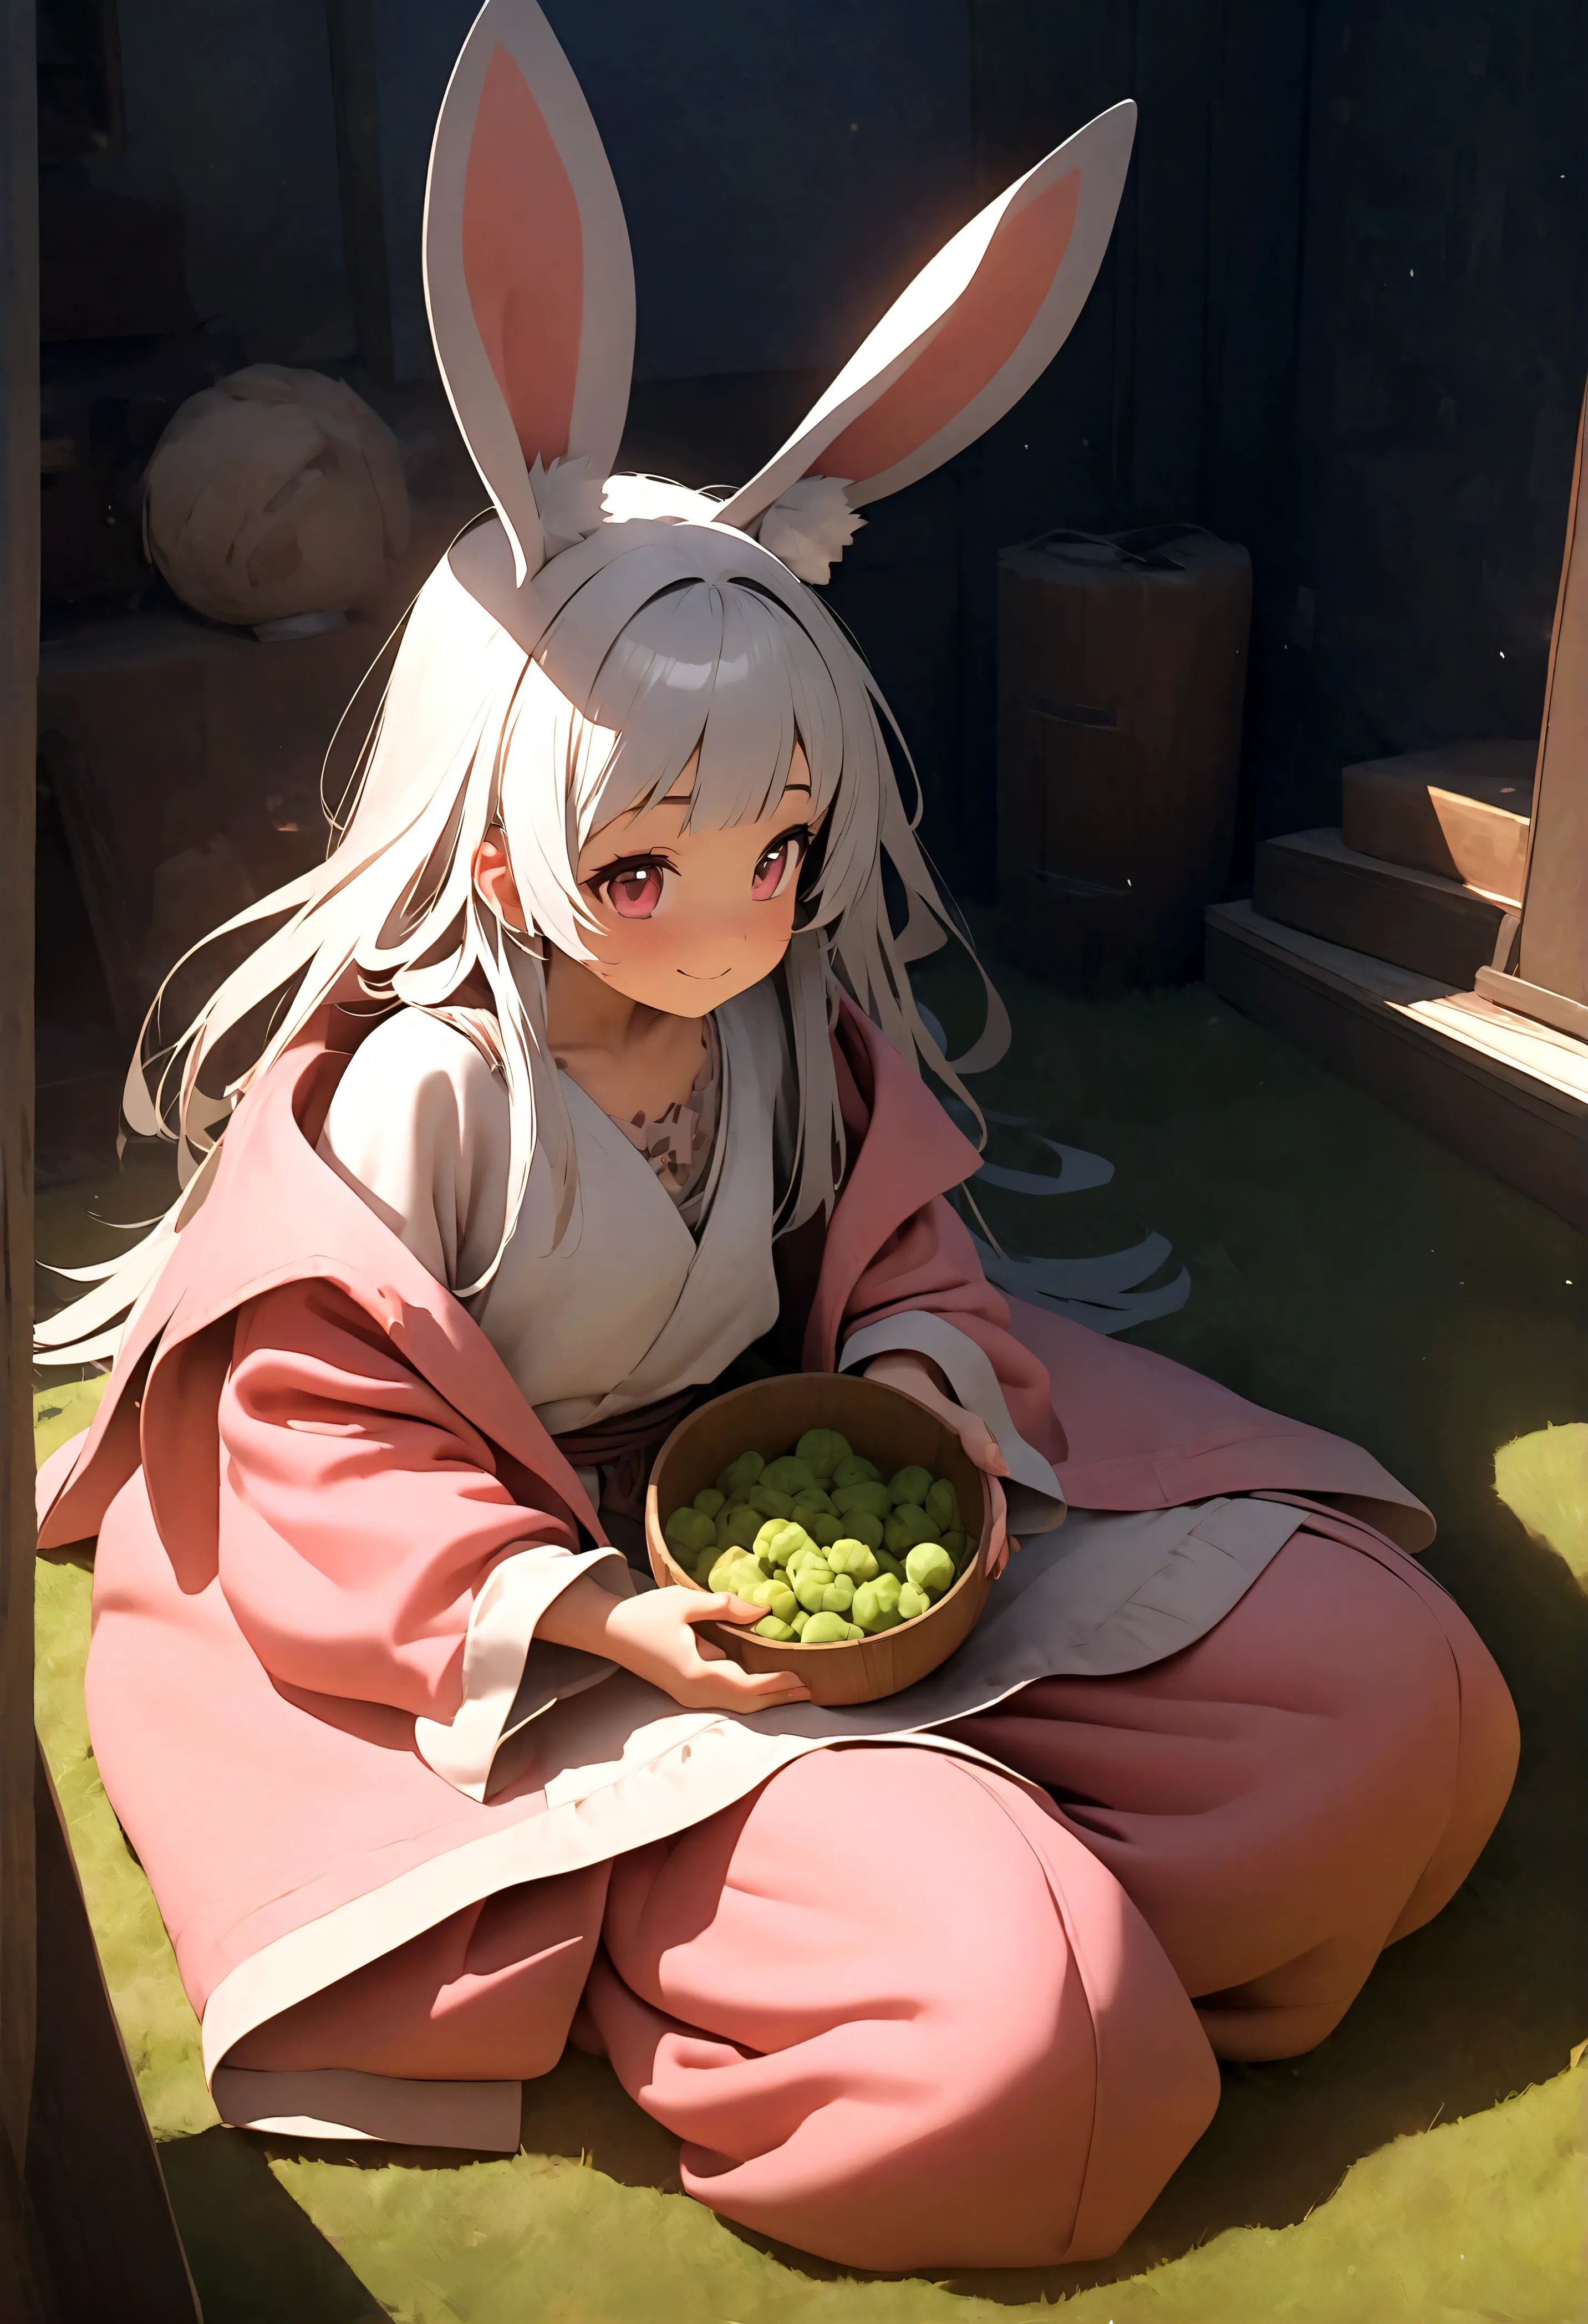 Nanaki\(Made in Abyss,male,Lovely,hairy,have,Rabbit ears,Silver Hair,long hair,Baggy pants,Tail,Smile\)Sitting and eating weird food,Beautiful nature, You can see strange and chaotic large animals from far away,, rest ,quality\(8K,wallpaper of extremely de...